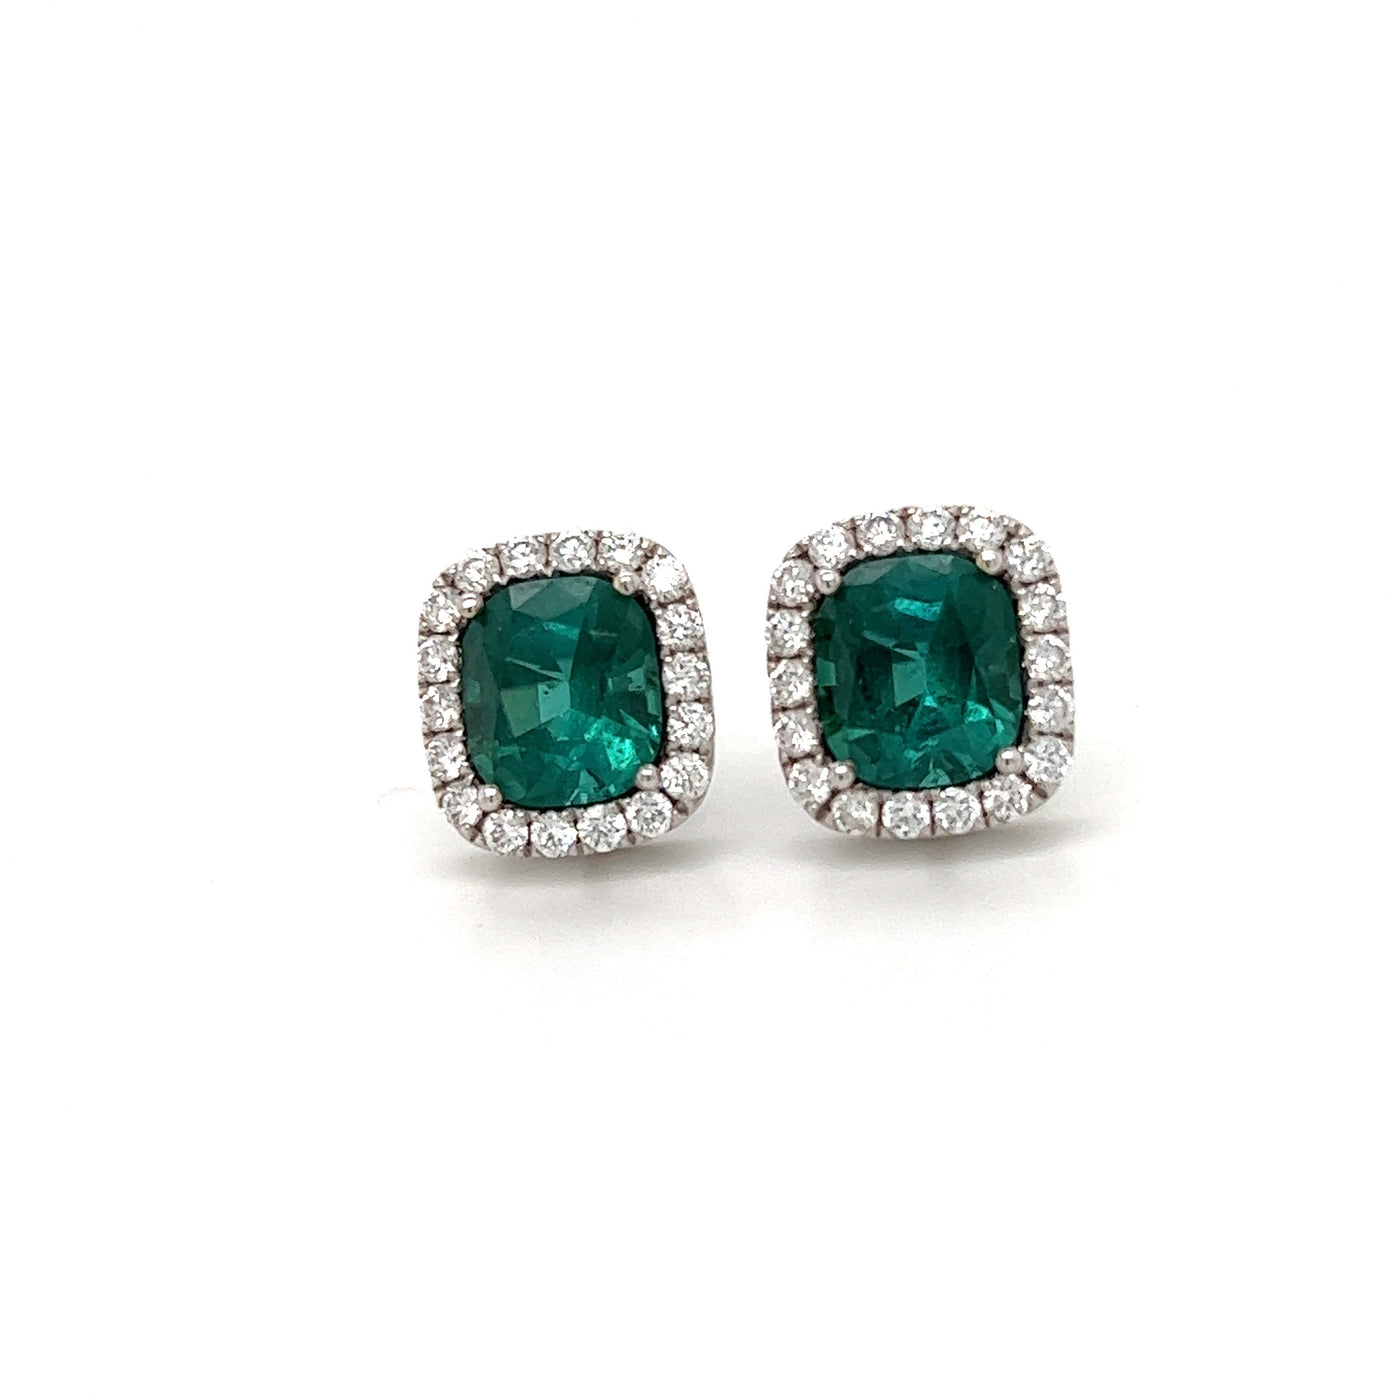 18ct white gold blue/green tourmaline and natural diamond earrings